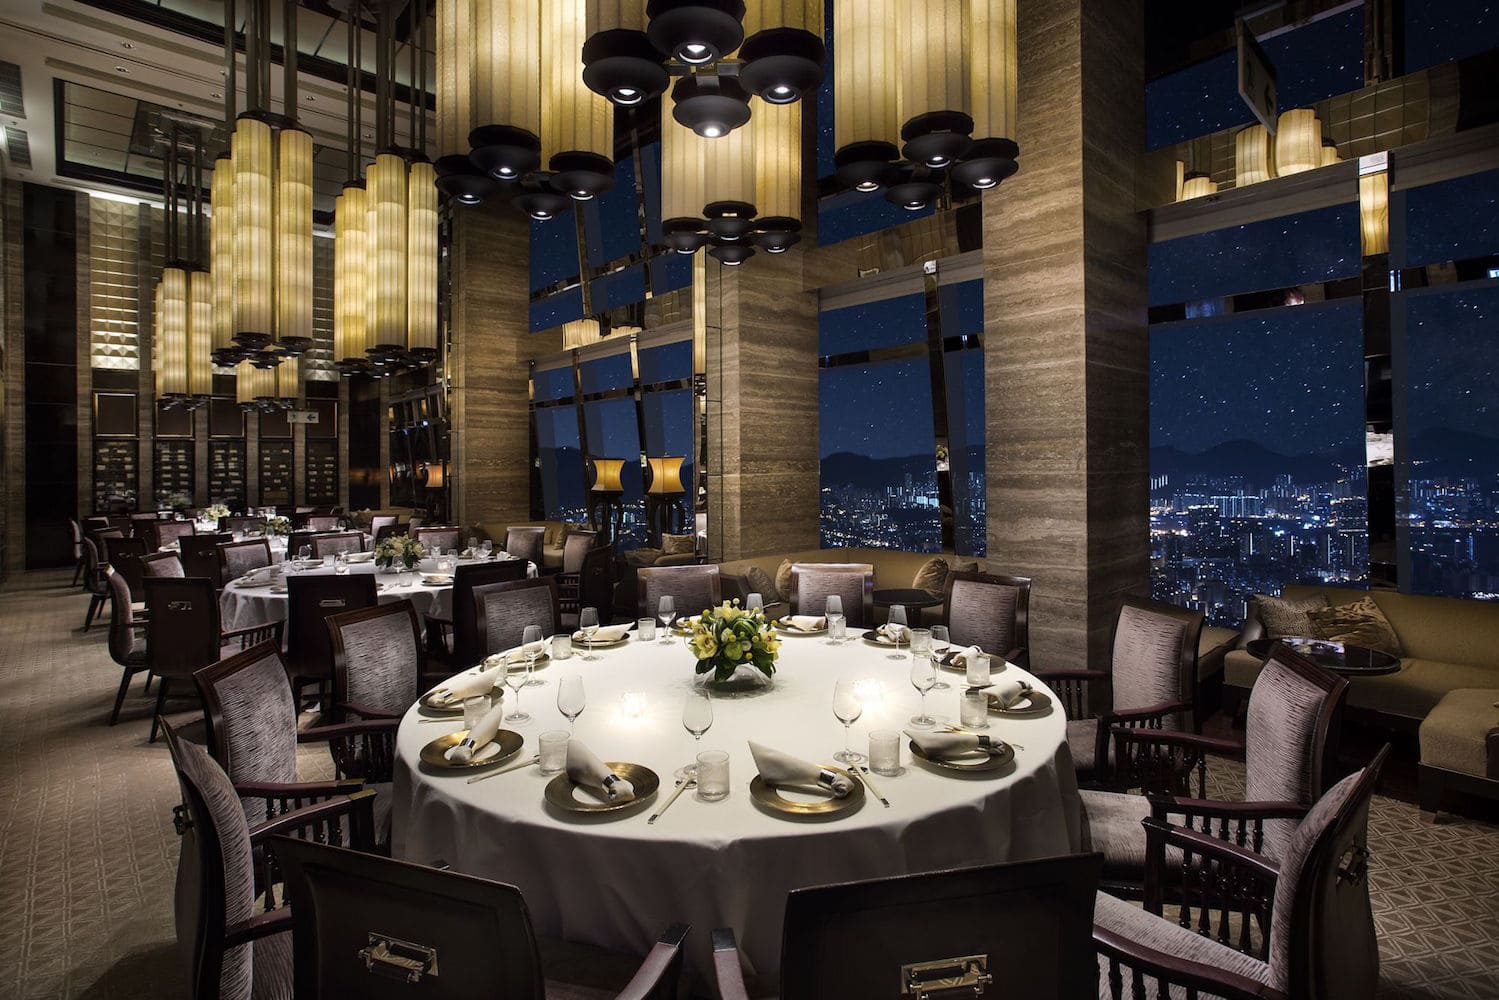 Soak in the views at these amazing destination restaurants across Asia